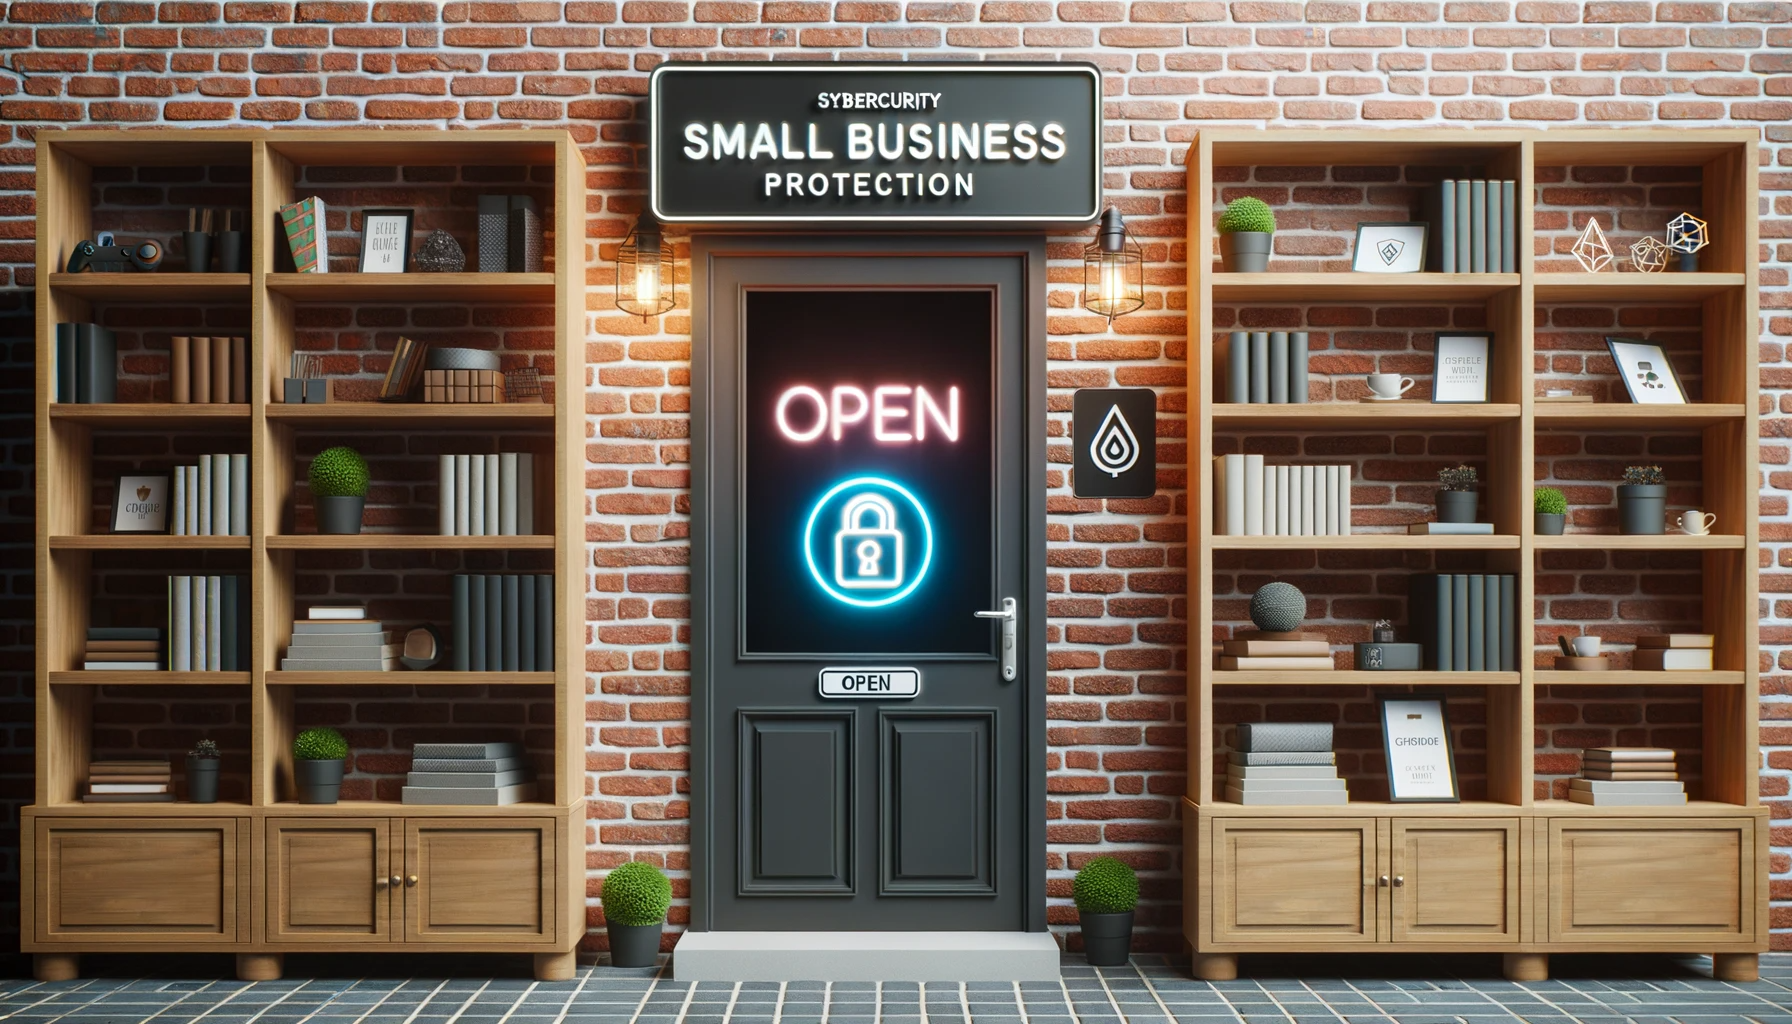 Introduction to Cybersecurity for Small Businesses